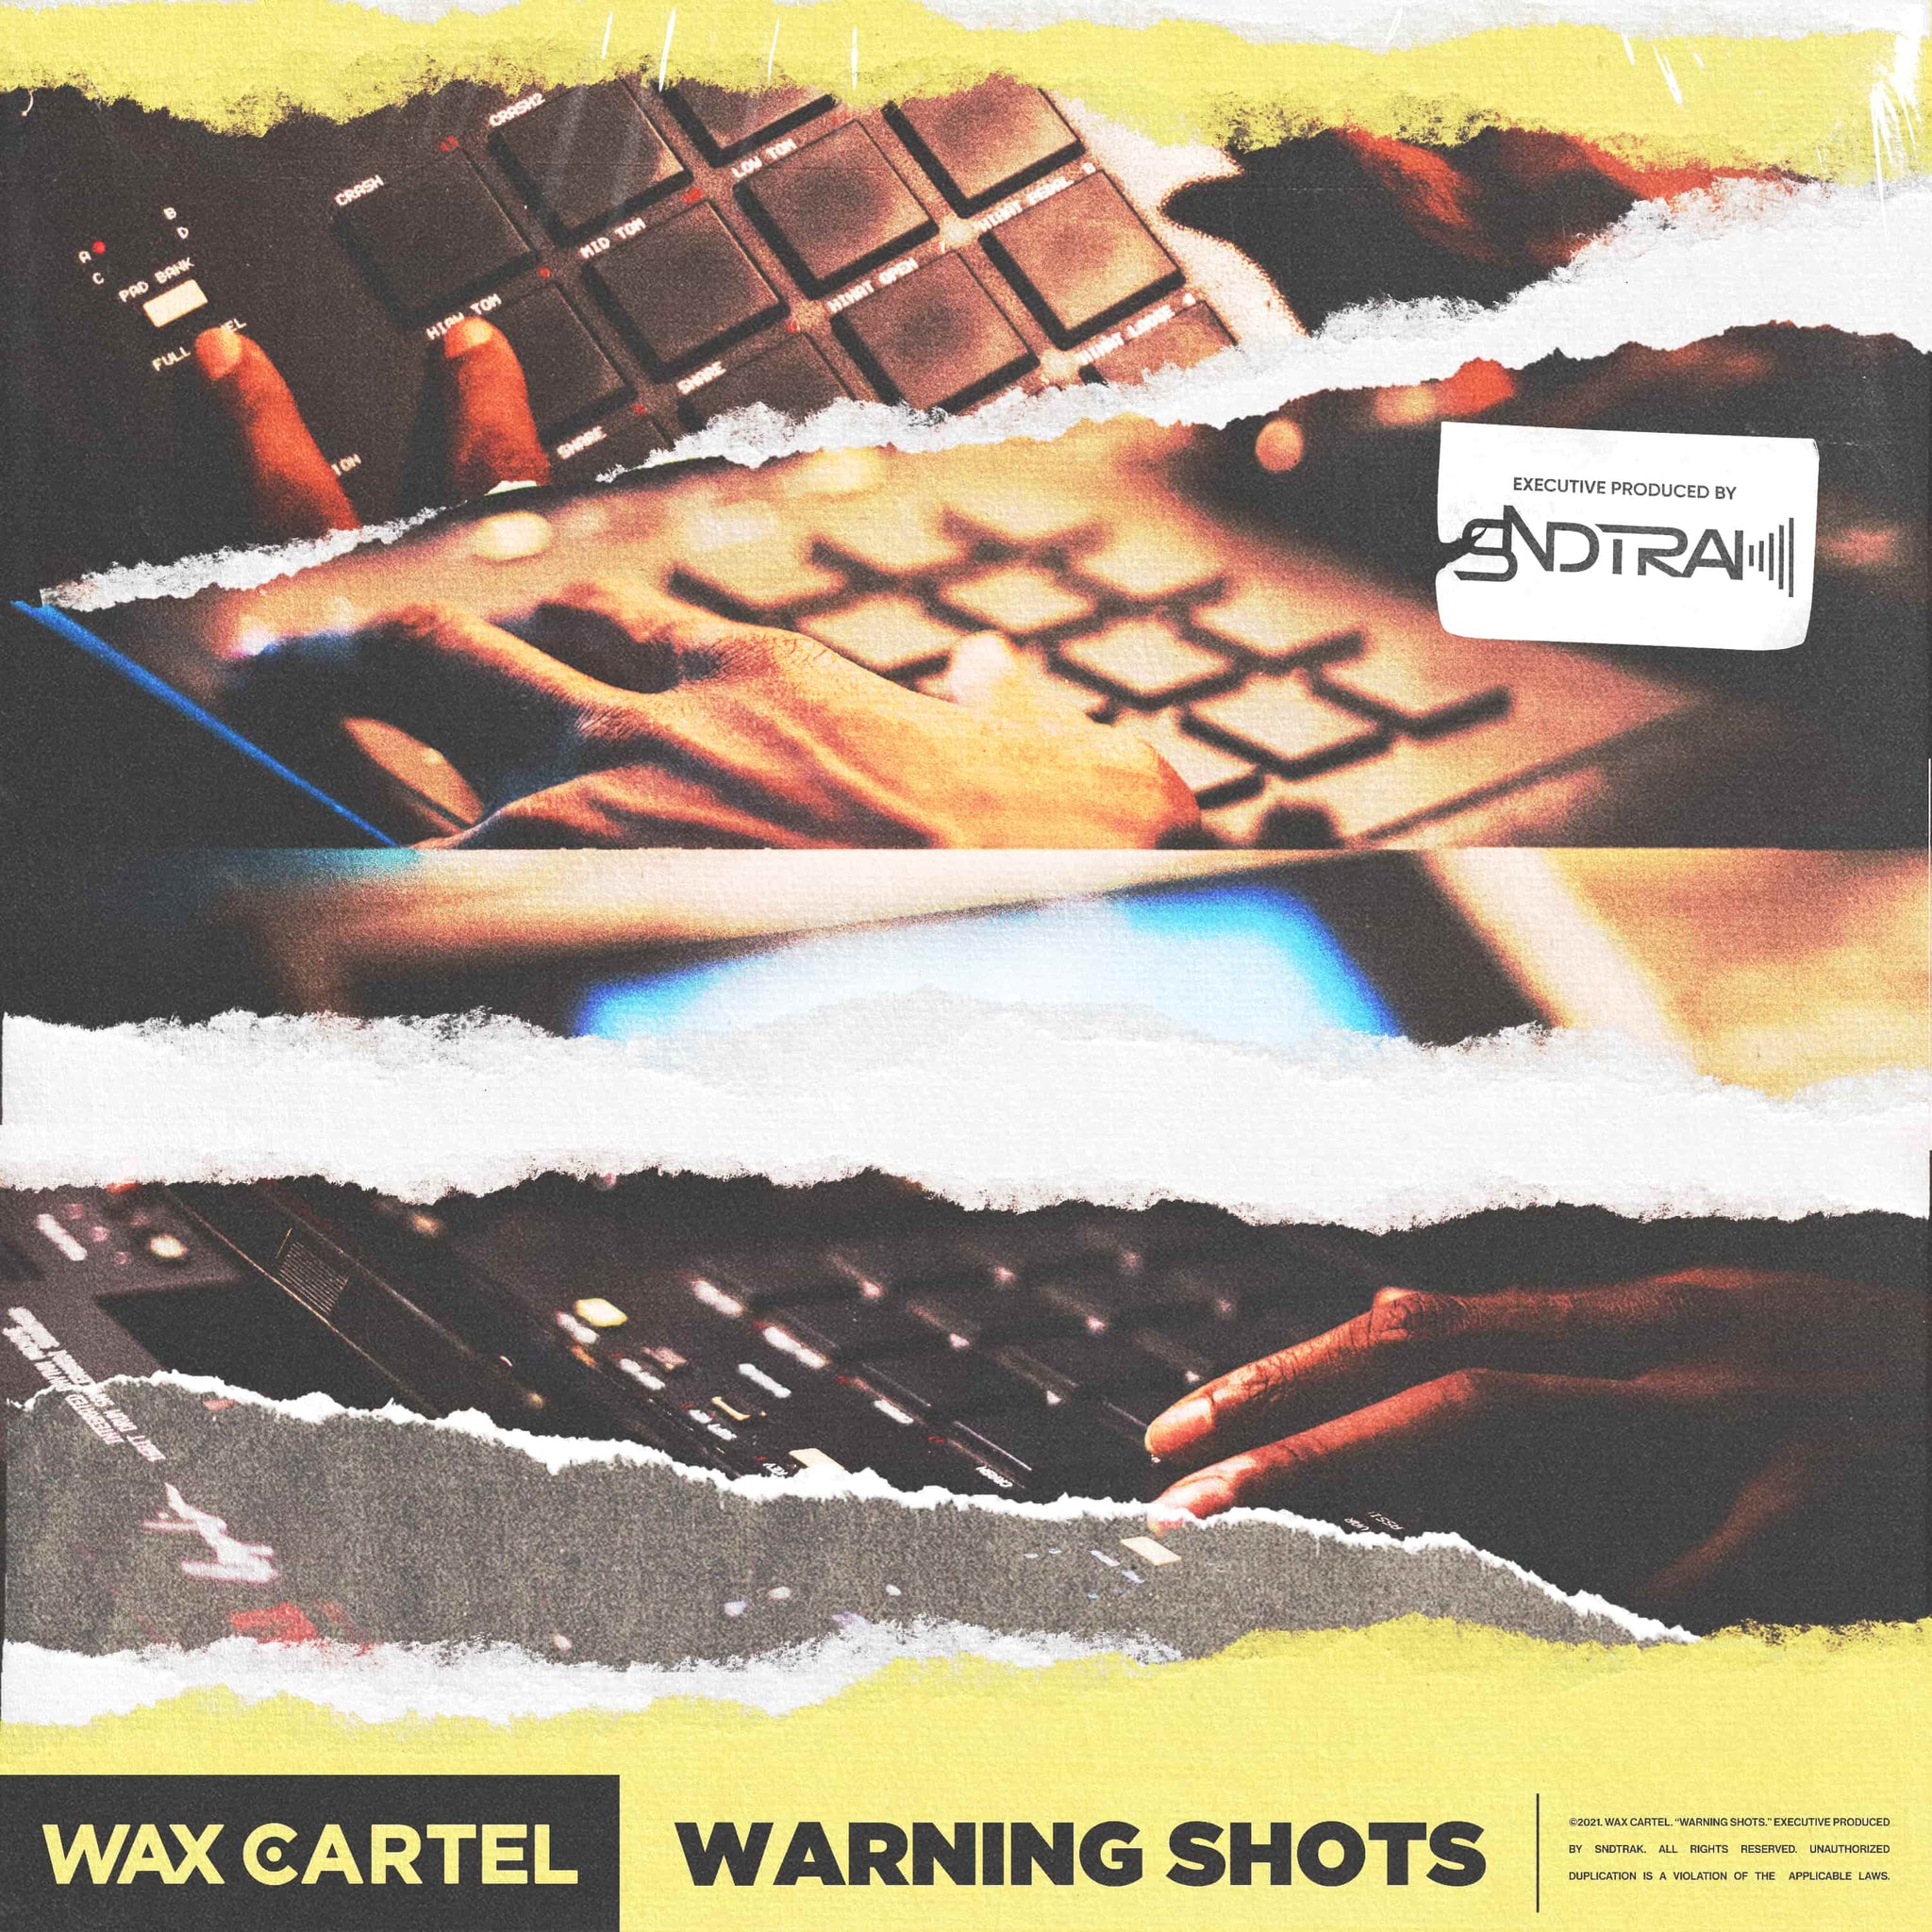 Yellow and black artwork featuring a Mpc 3000 for drum break sample pack titled "Warning Shots" produced by Soundtrack (Sndtrak), Jamla producer and member of 9th Wonder's Soul Council.